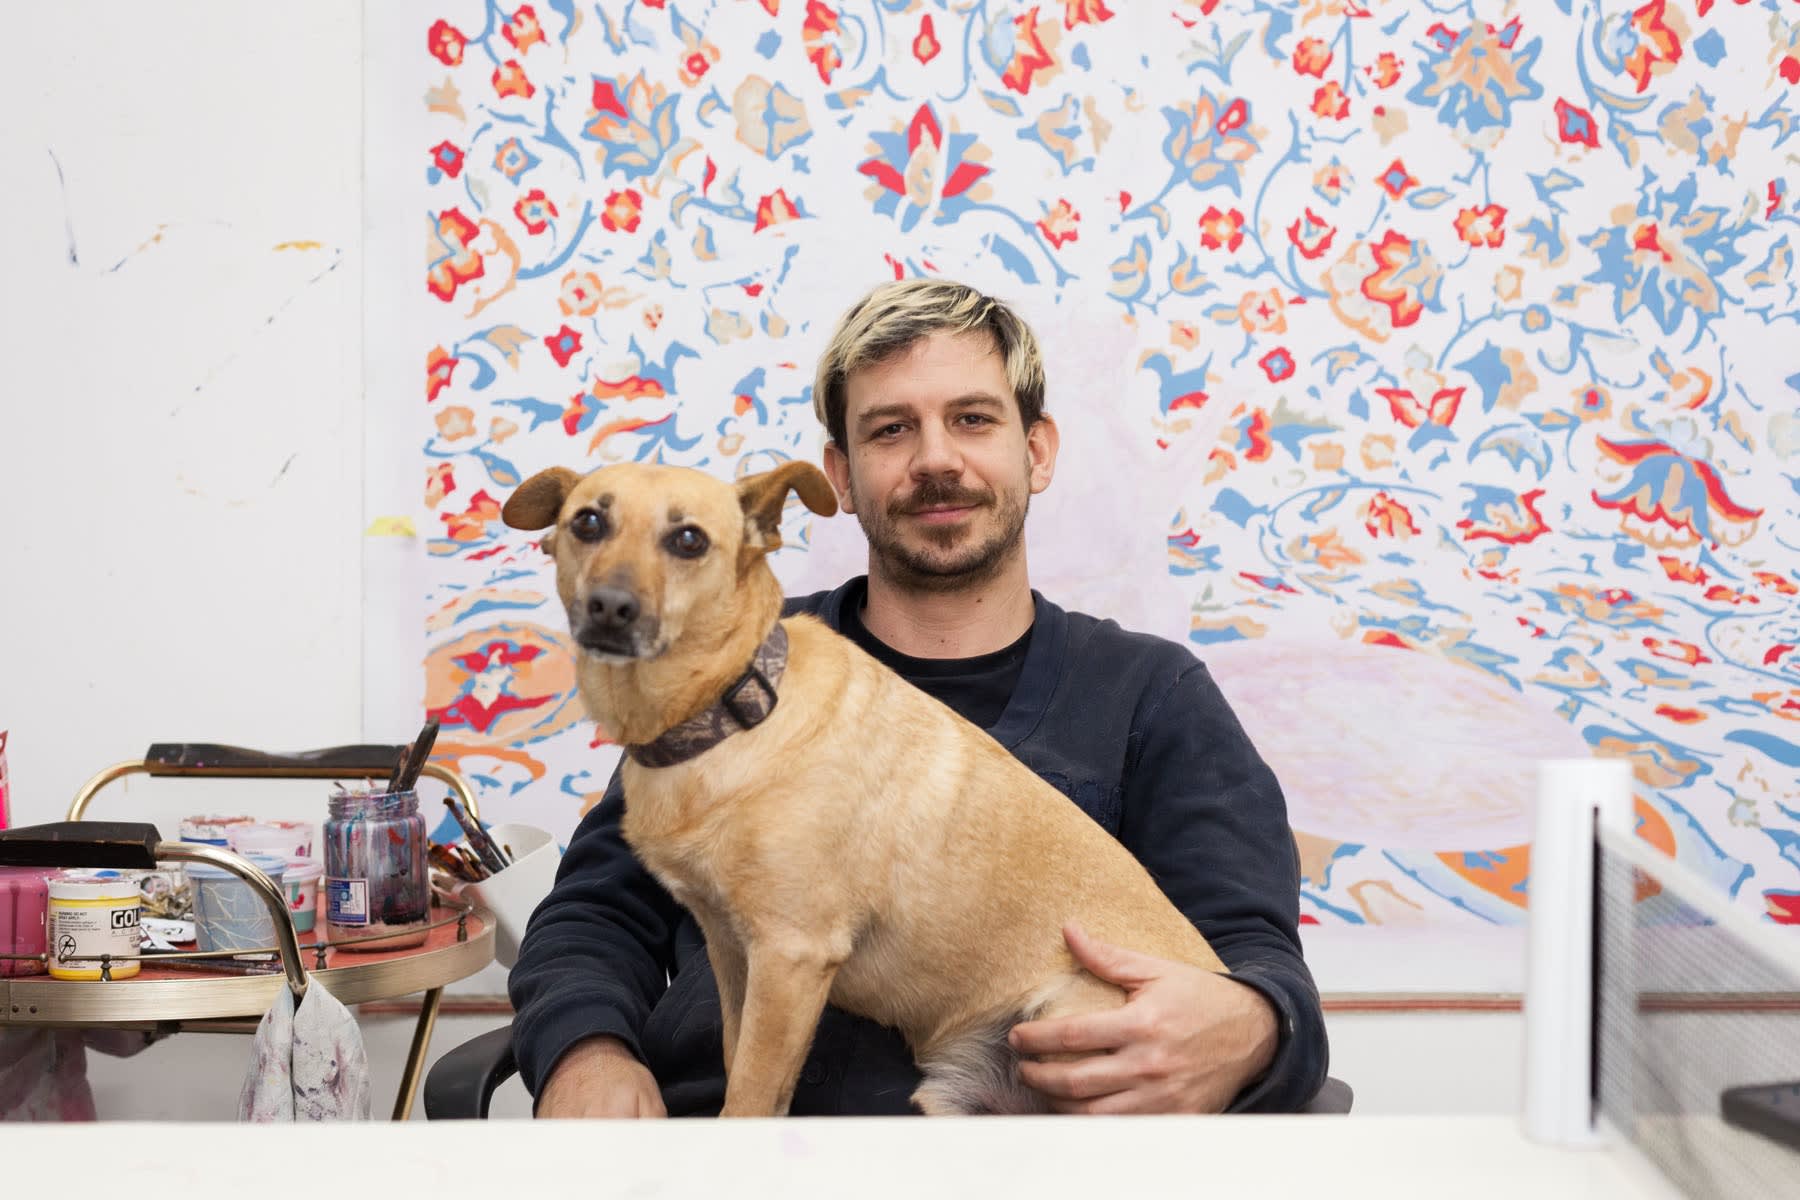 Francisco Diaz Scotto and his dog in the studio 